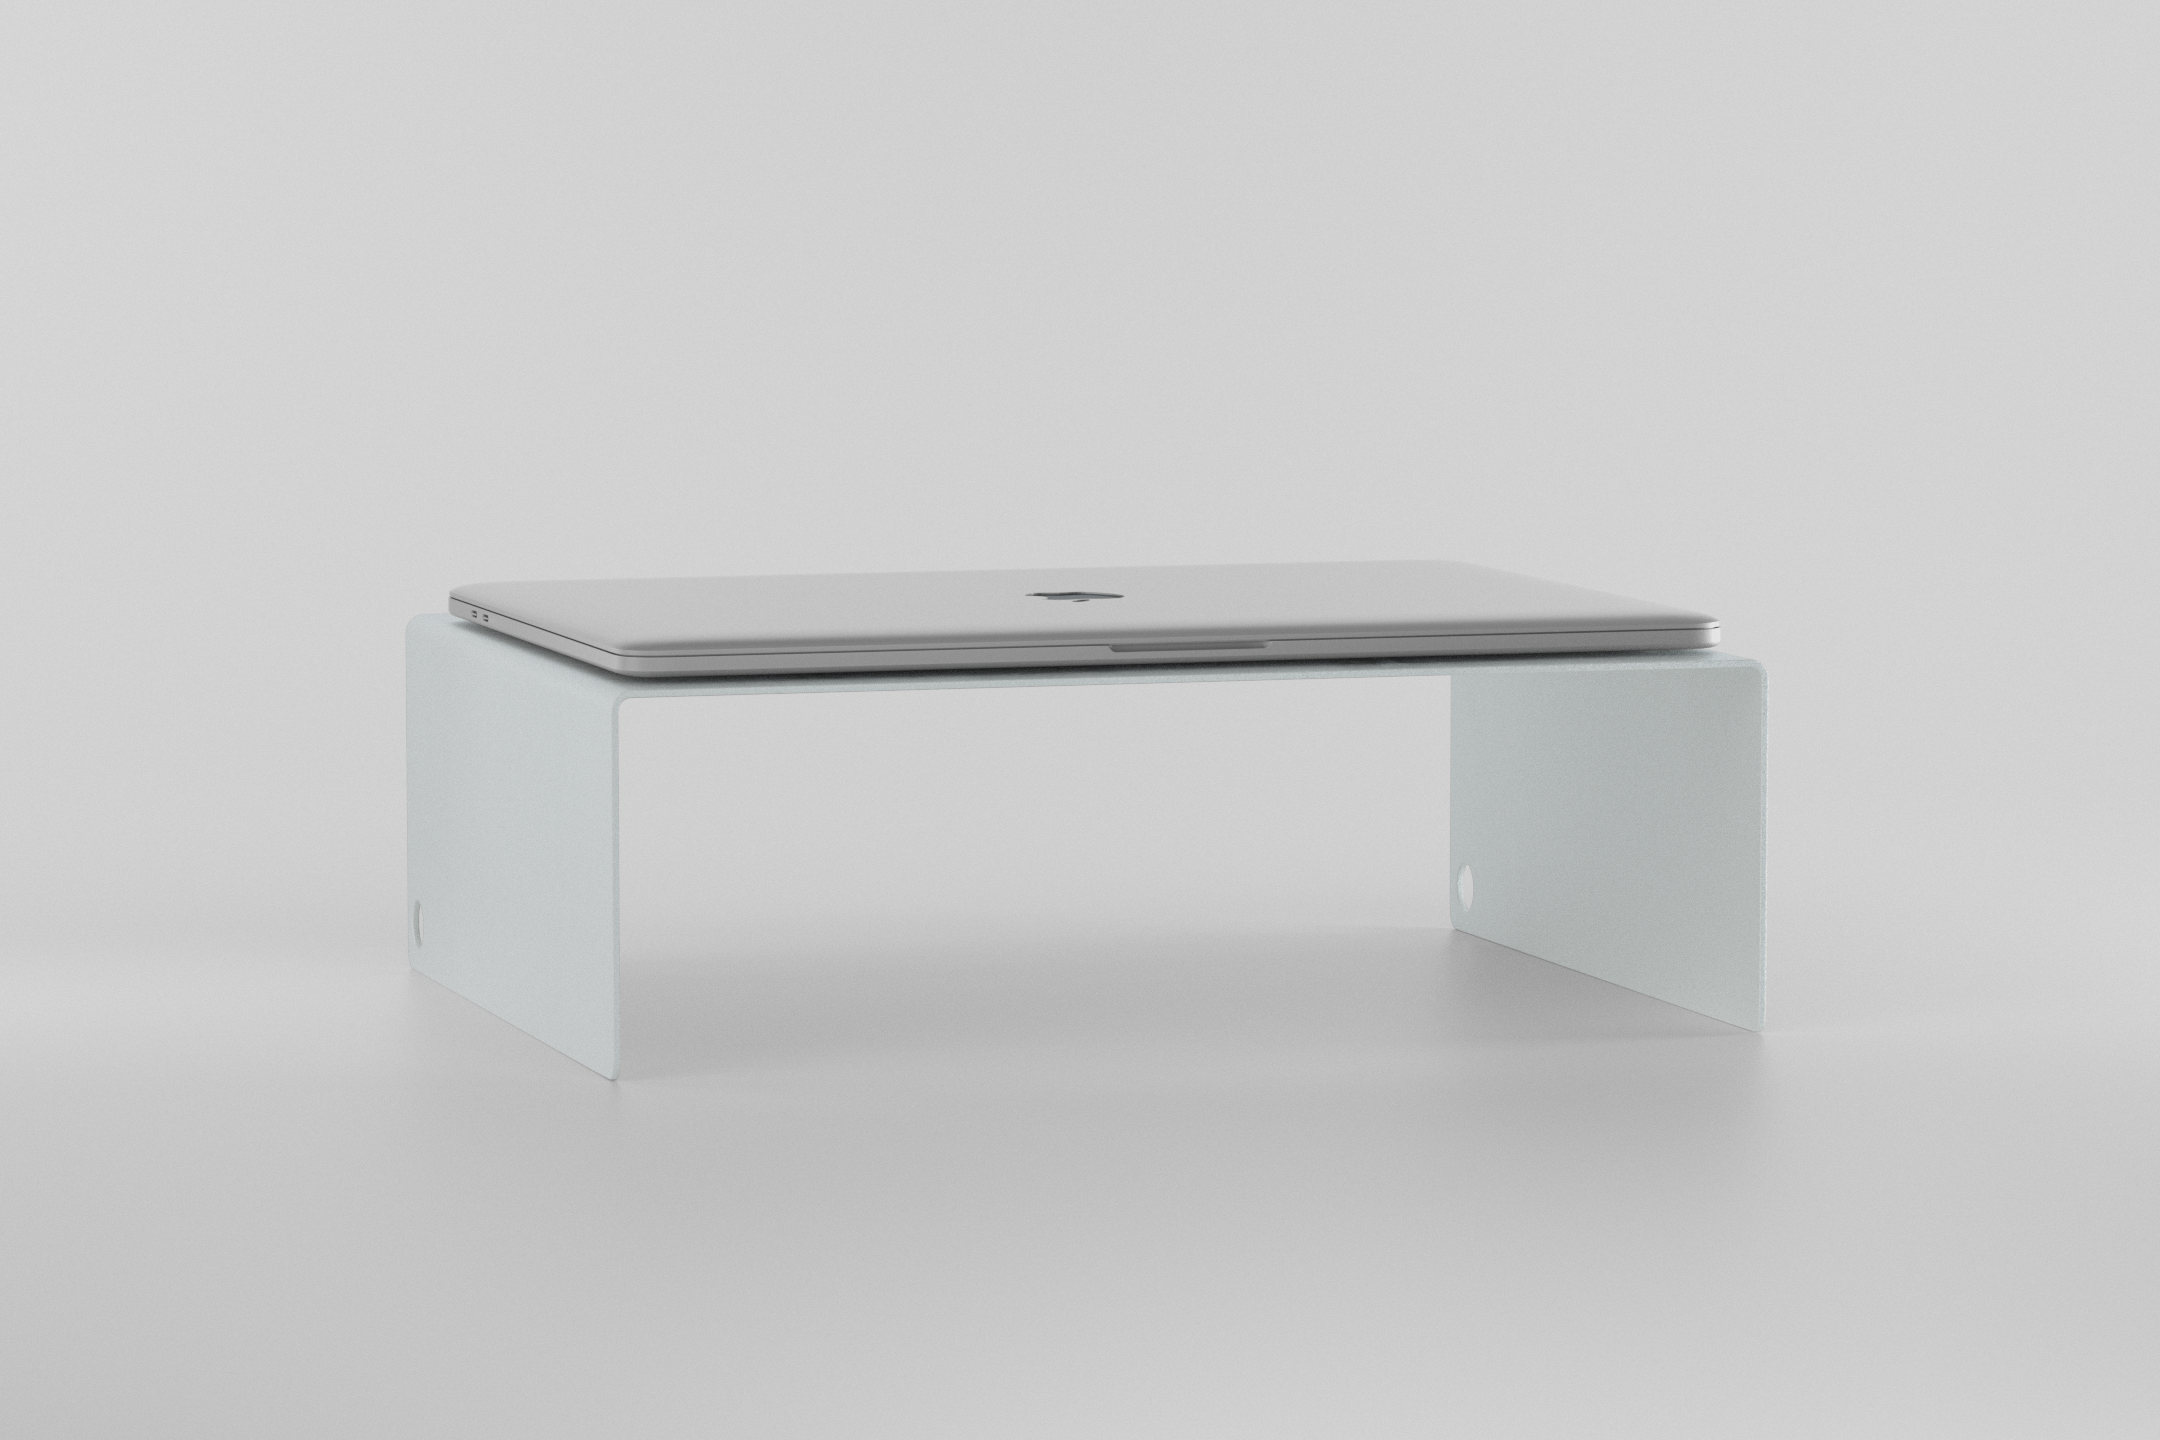 The Laptop Stand - white with laptop on it